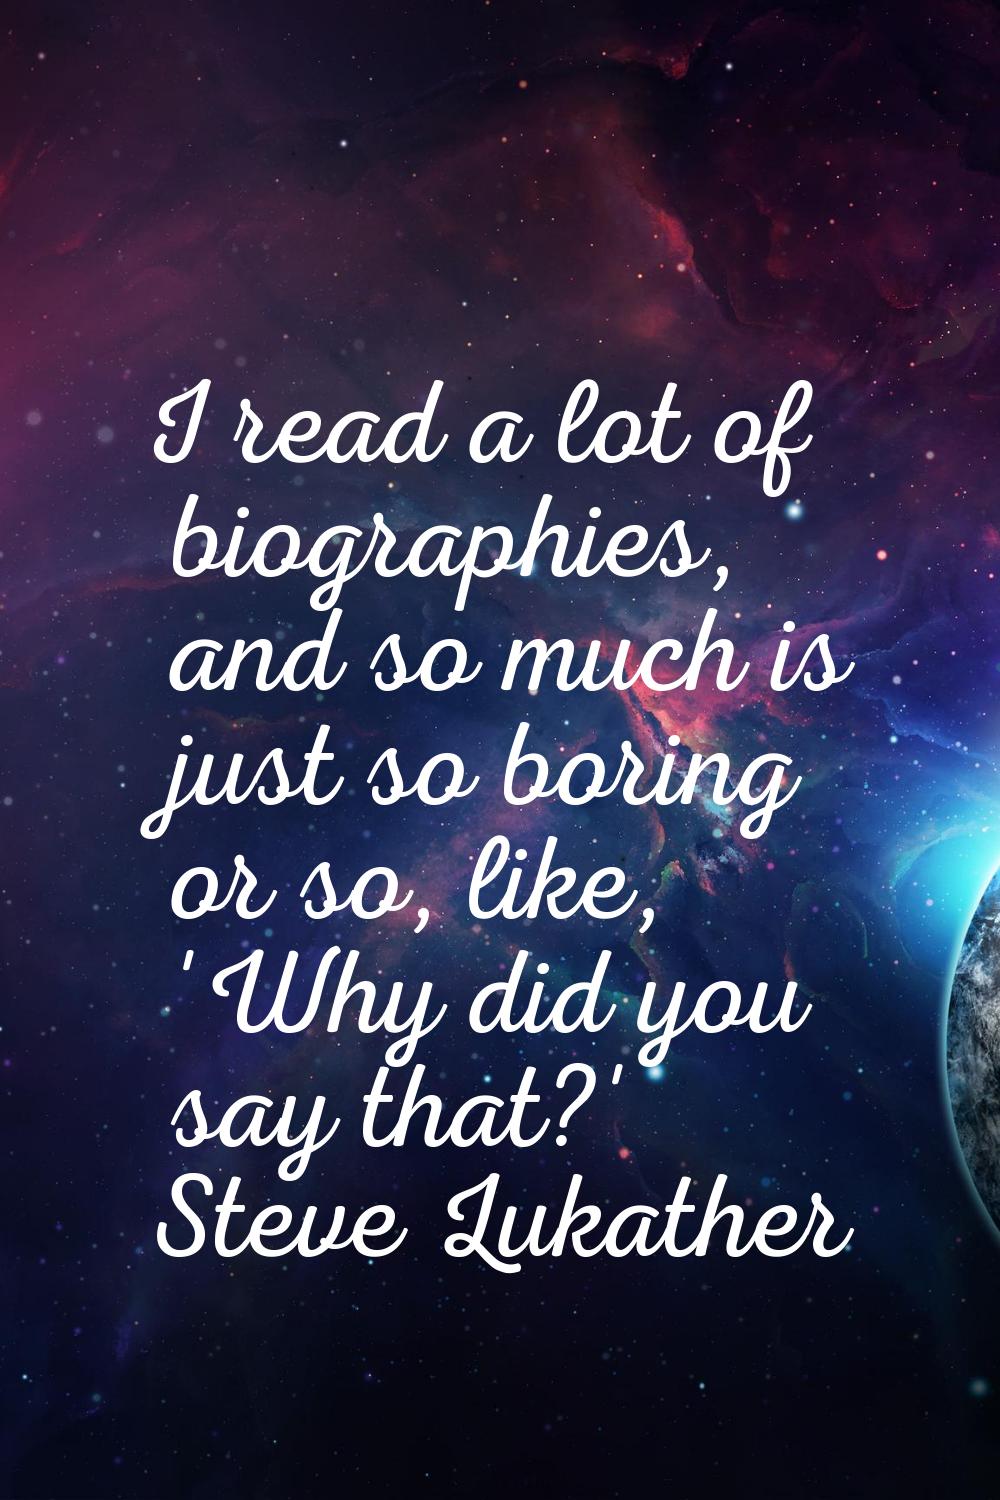 I read a lot of biographies, and so much is just so boring or so, like, 'Why did you say that?'